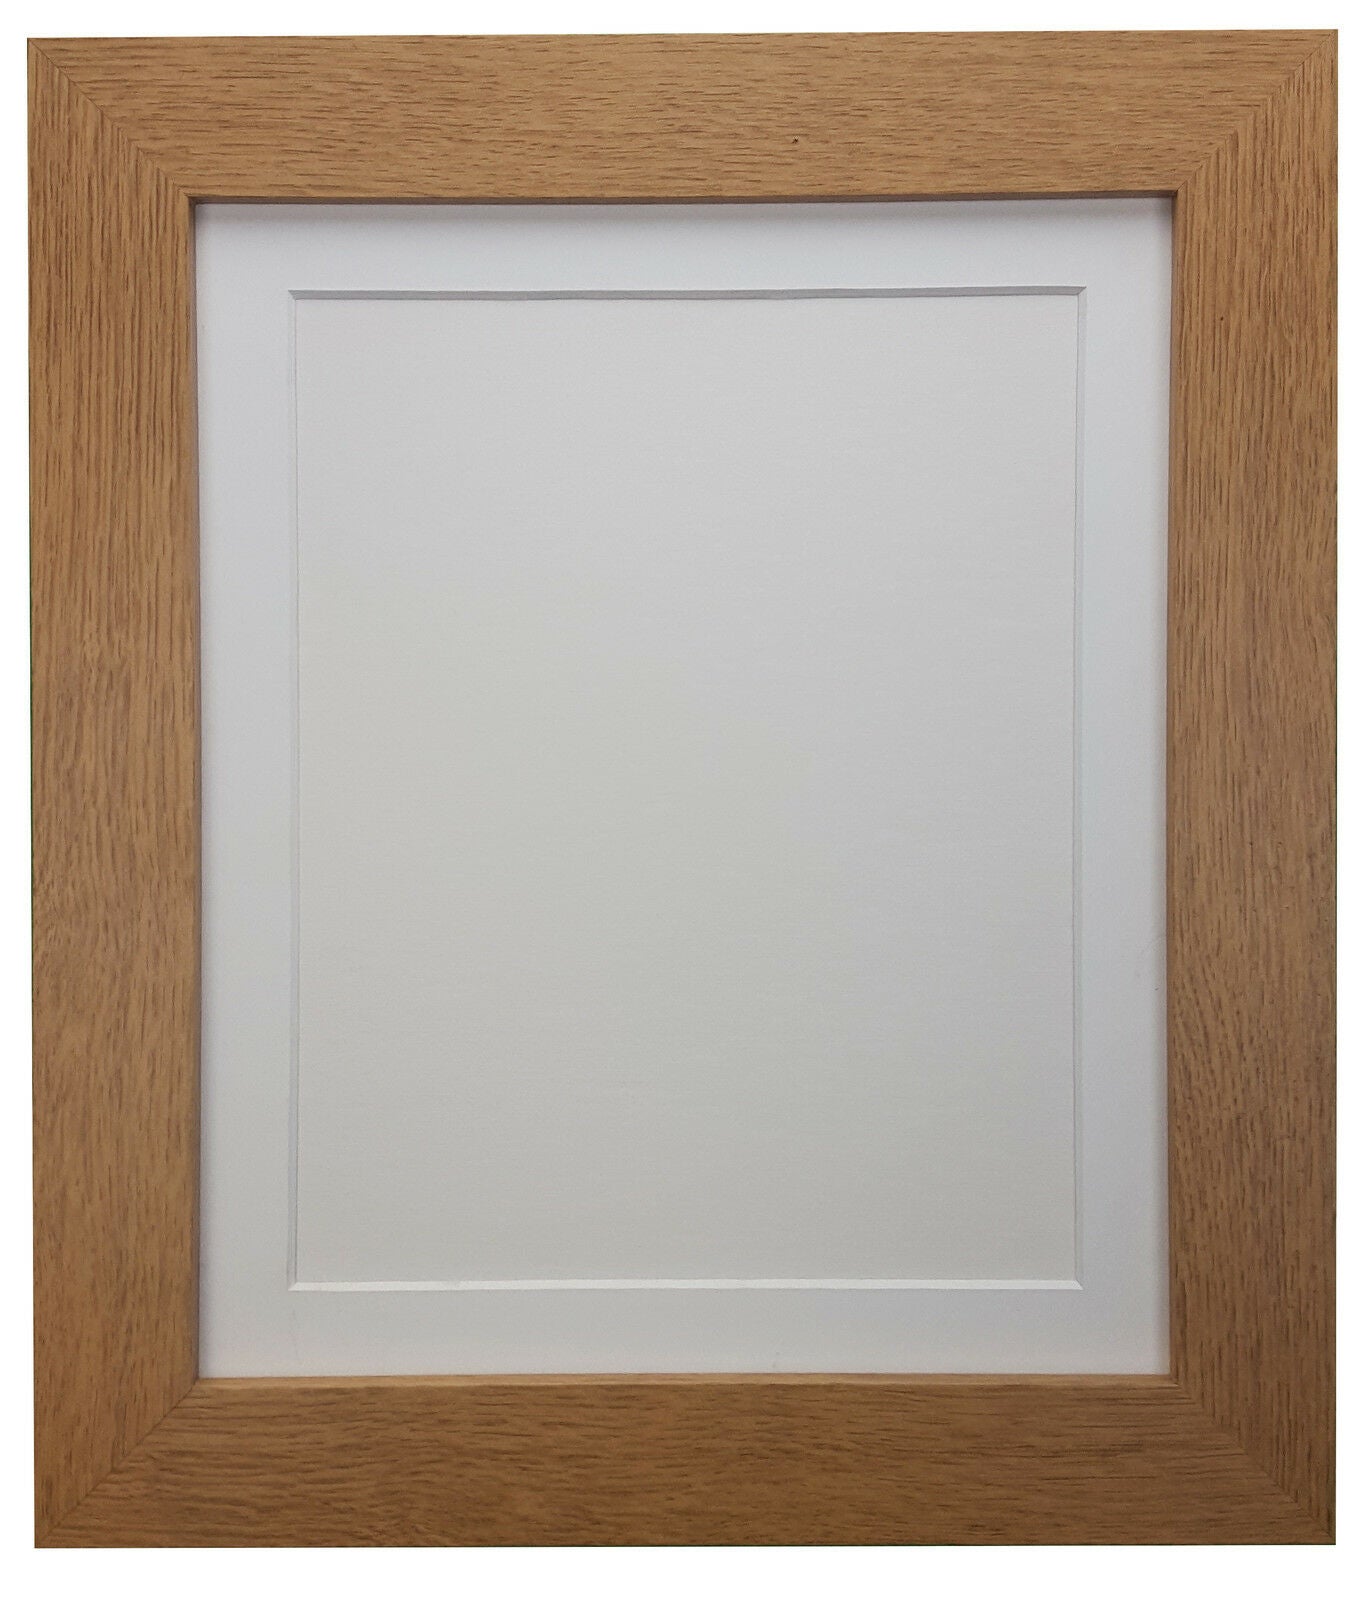 solid pine picture frame